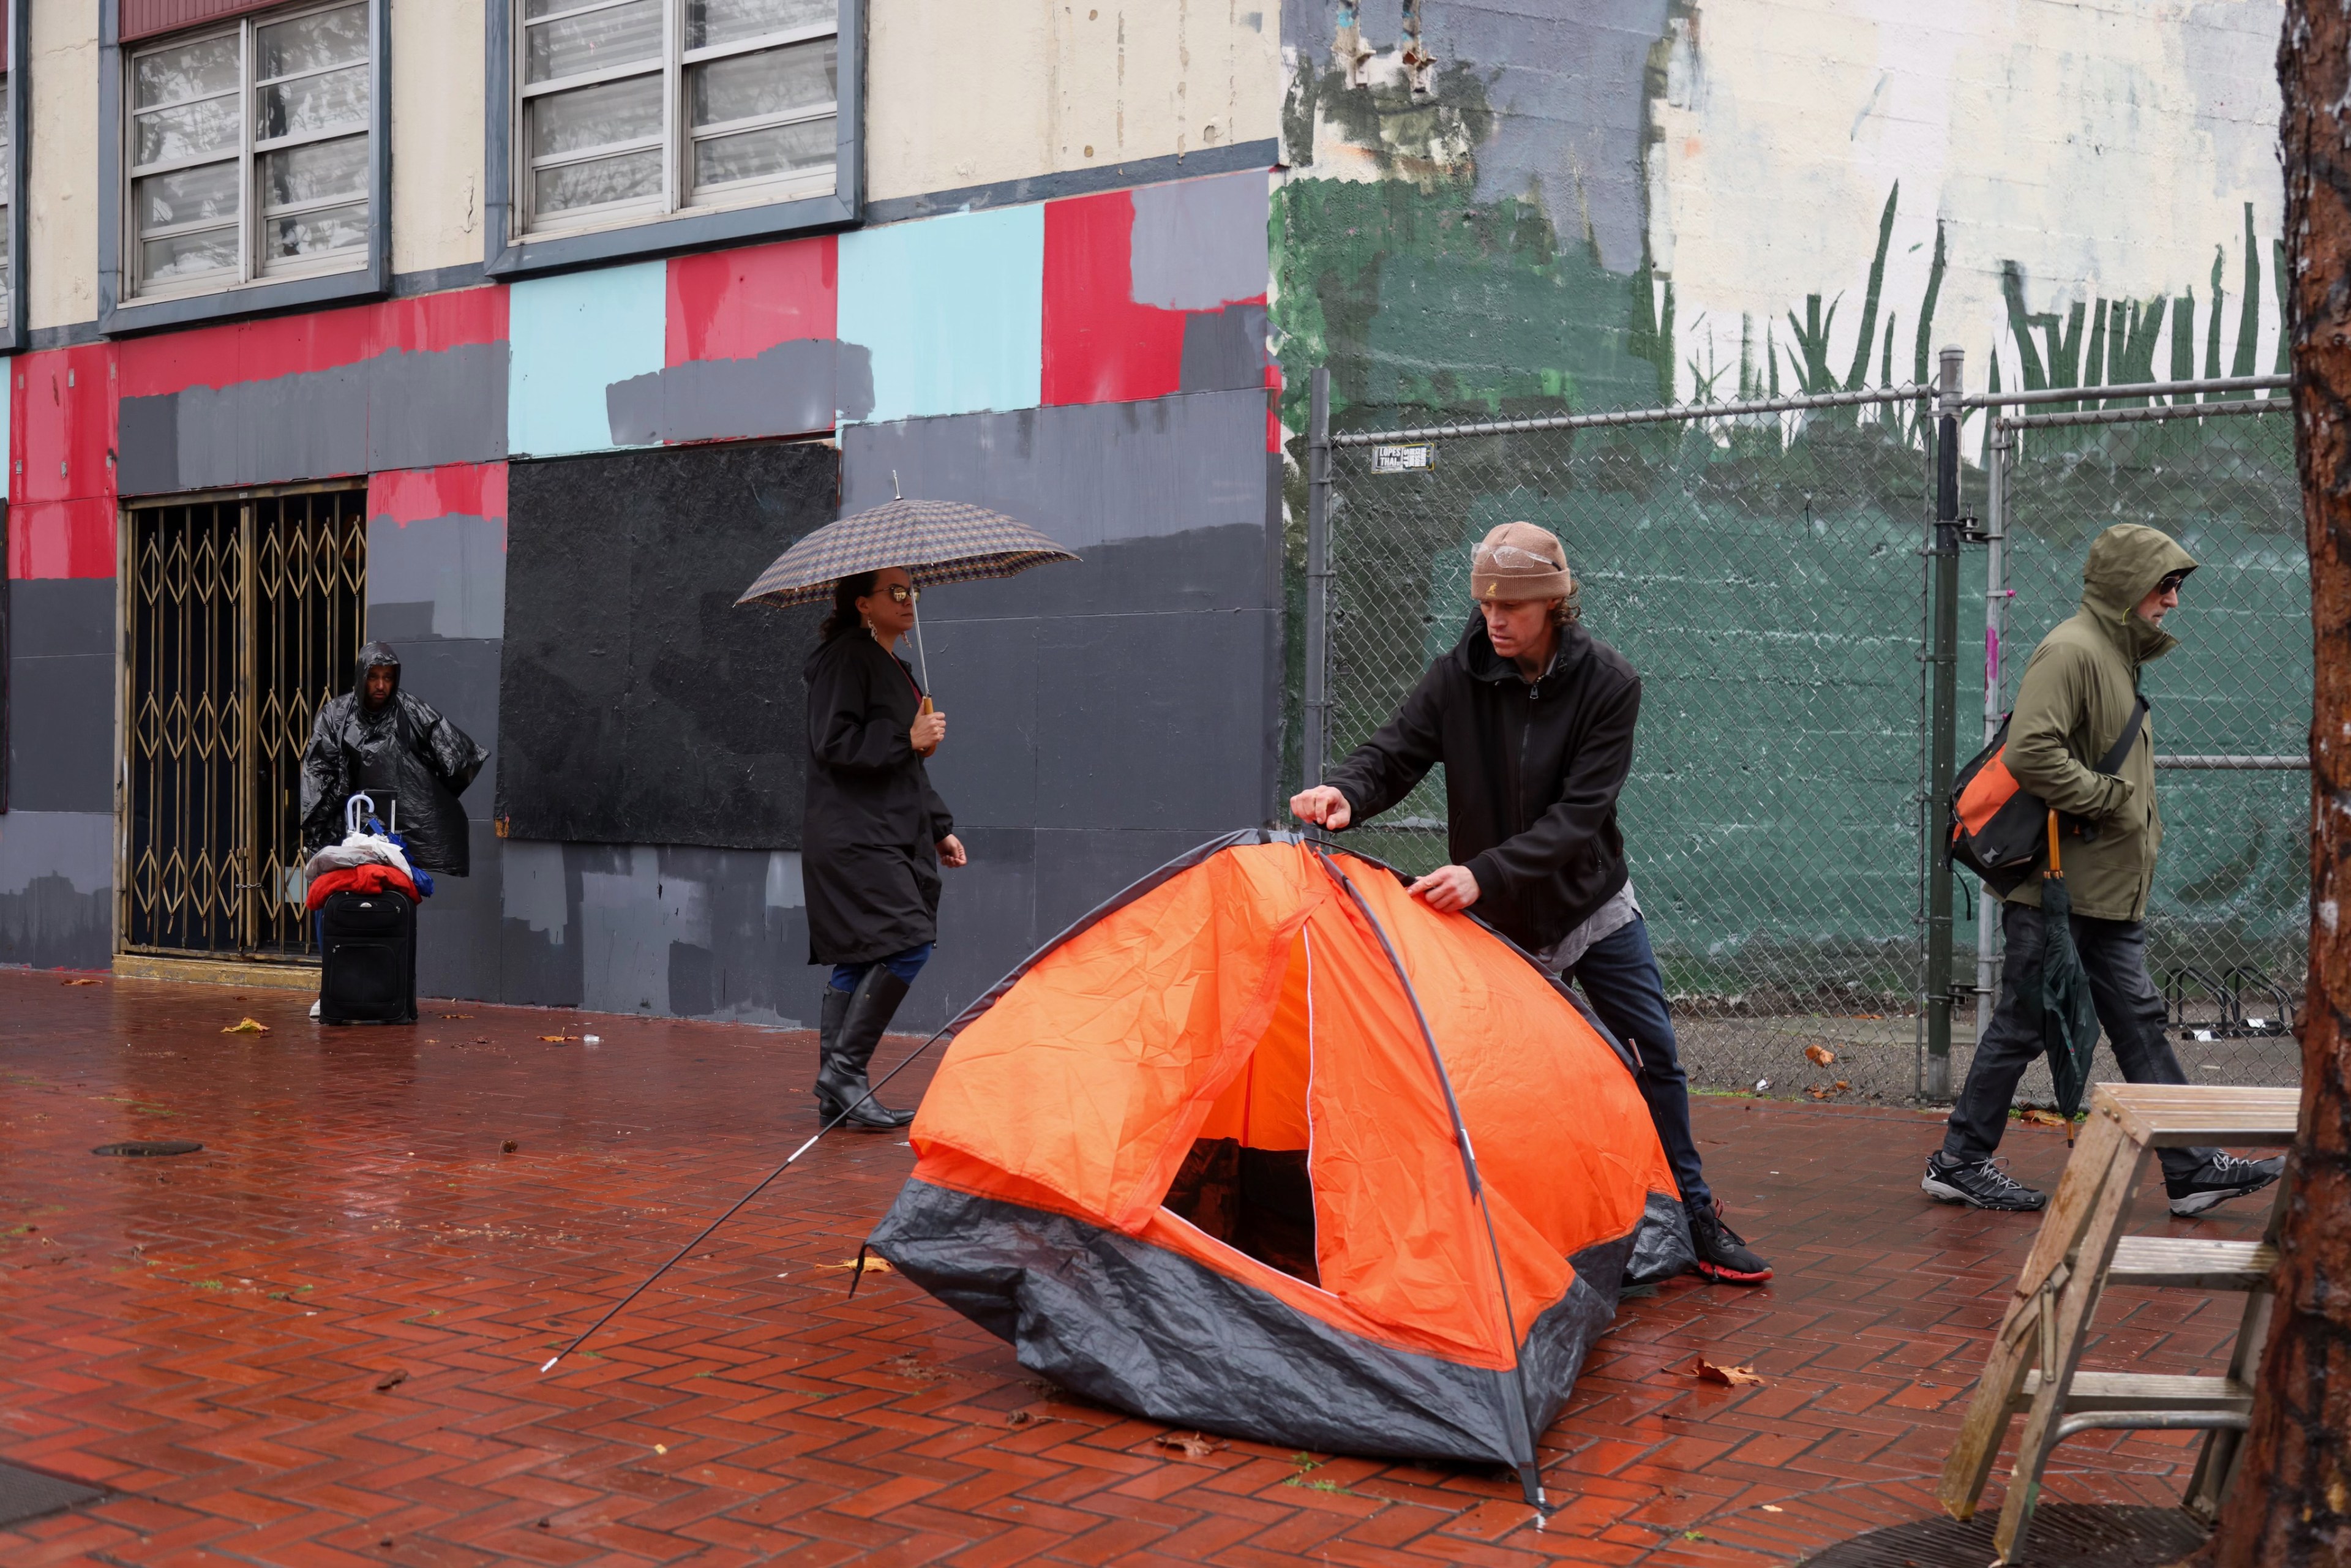 A person sets up an orange tent on a wet city sidewalk, while others with umbrellas pass by a colorful mural wall.